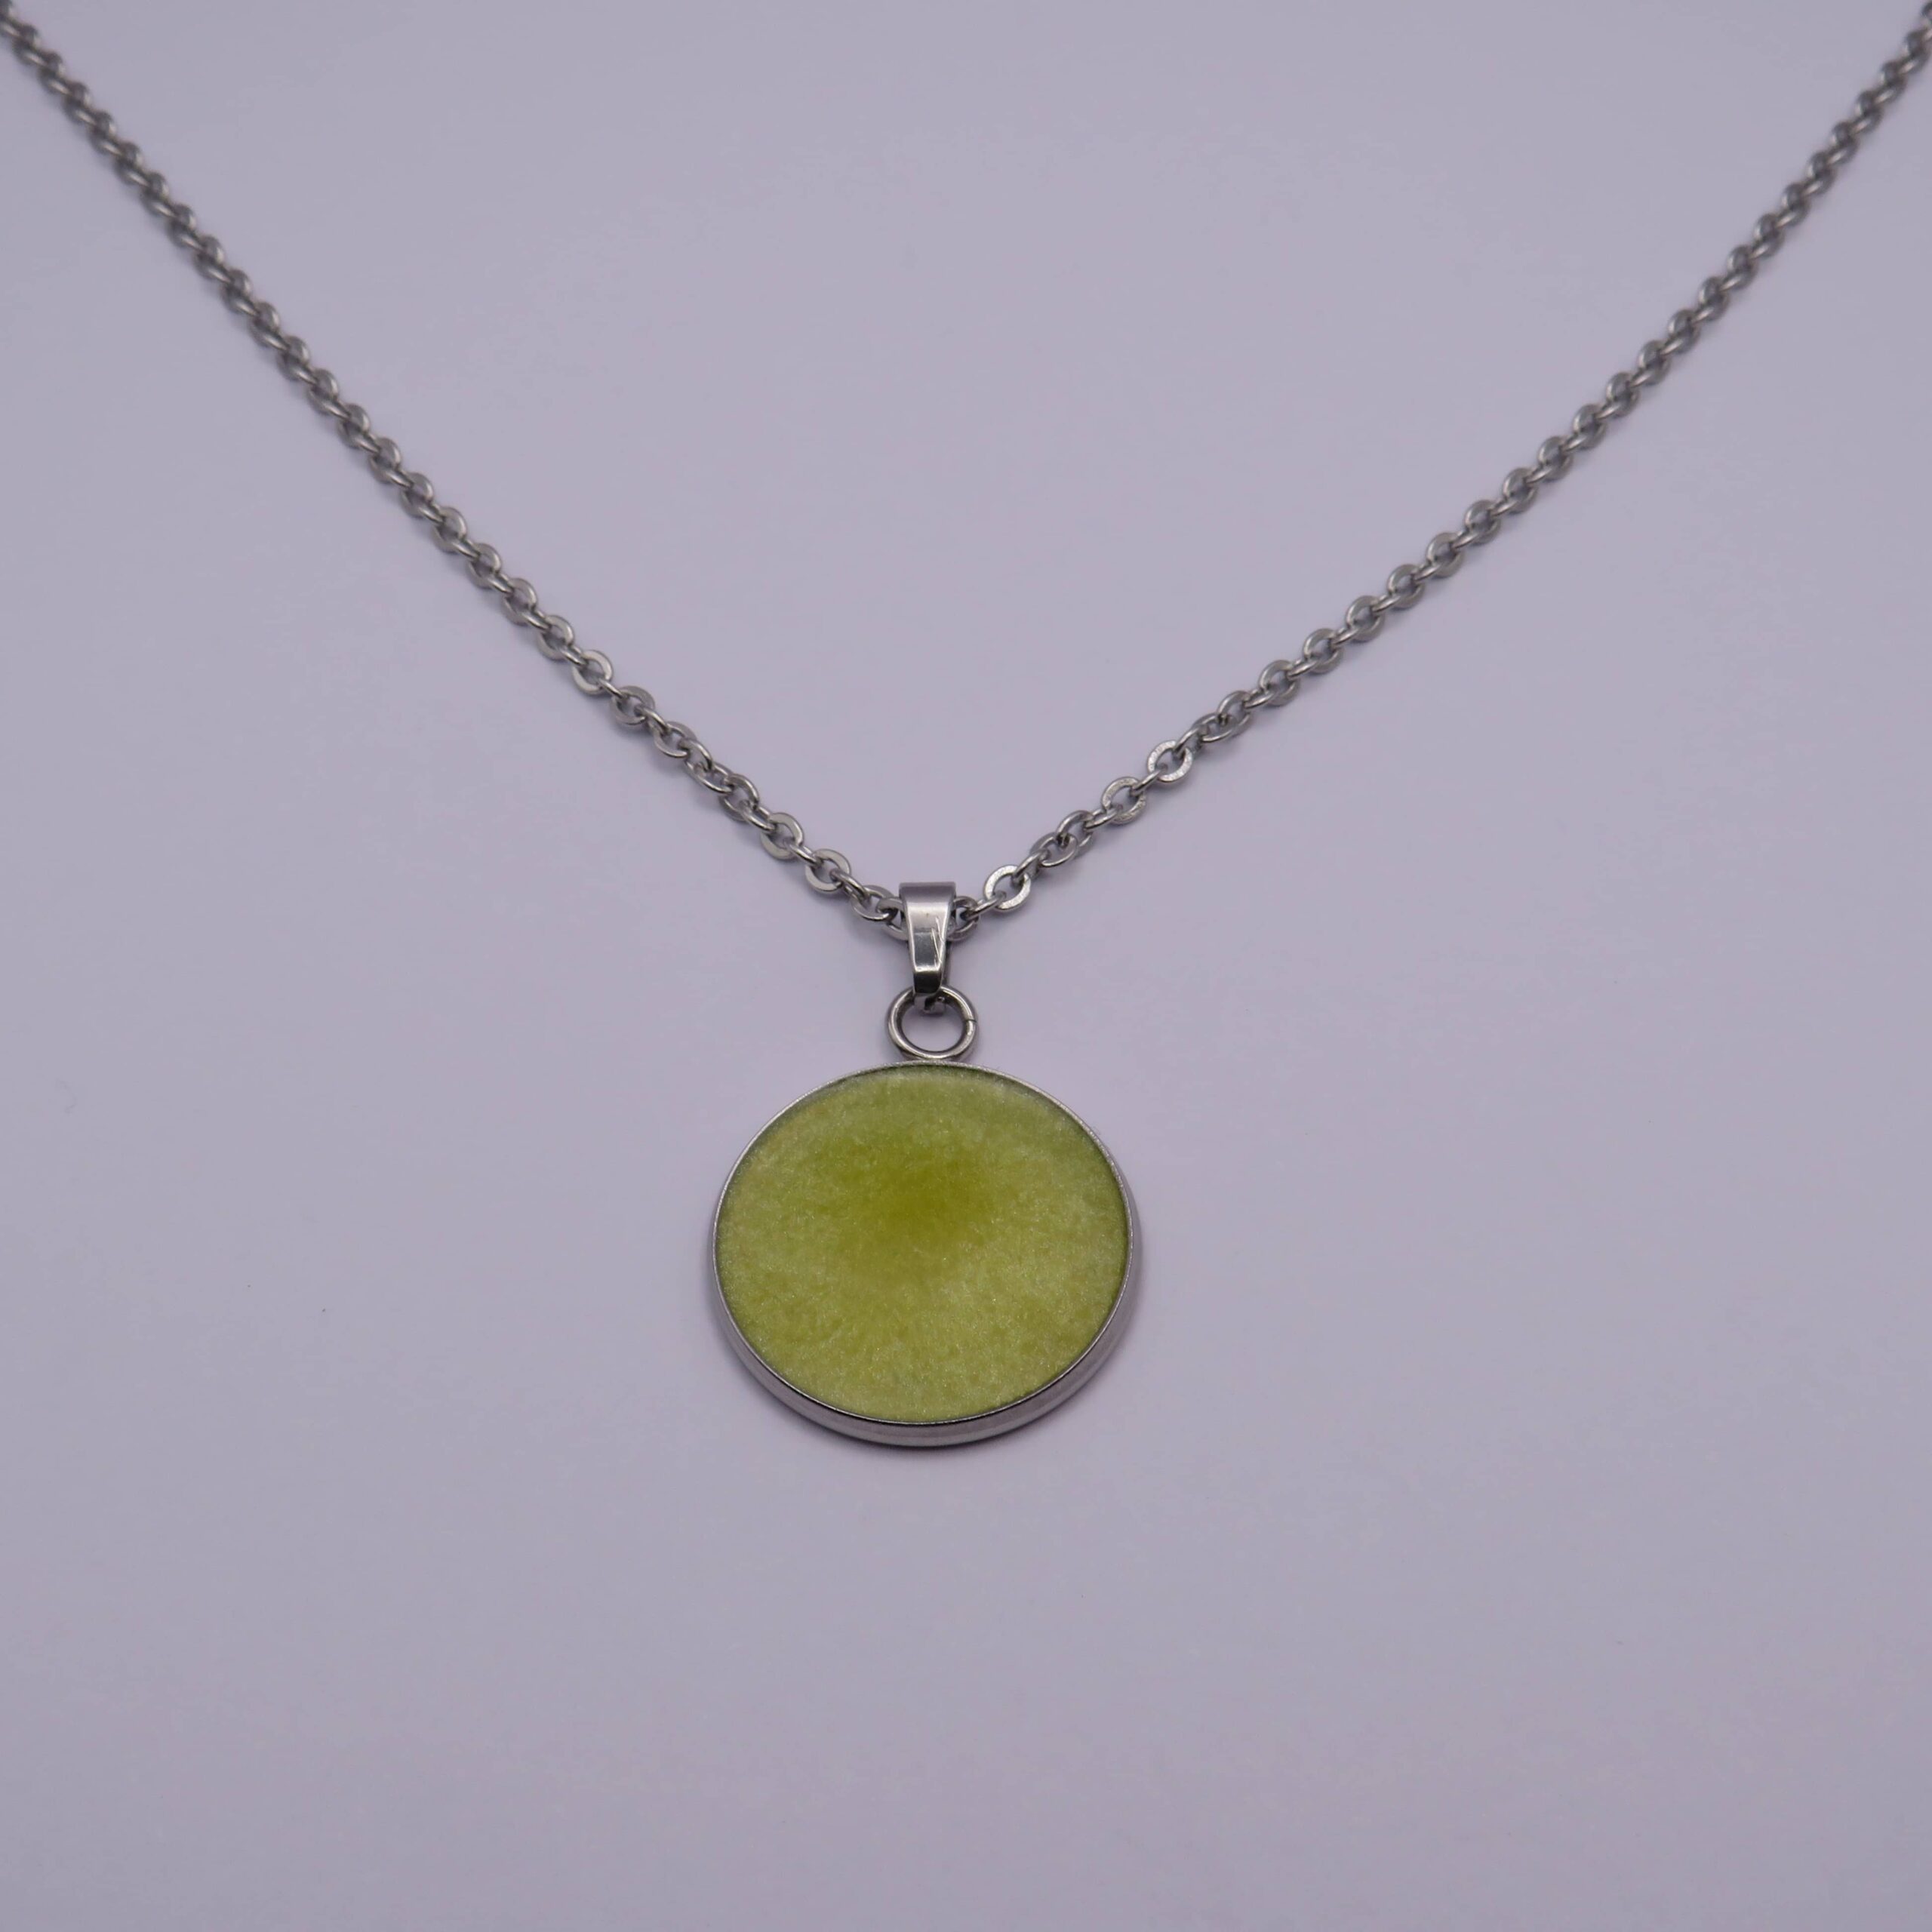 Stainless Steel Yellow Cabochon Pendant Necklace